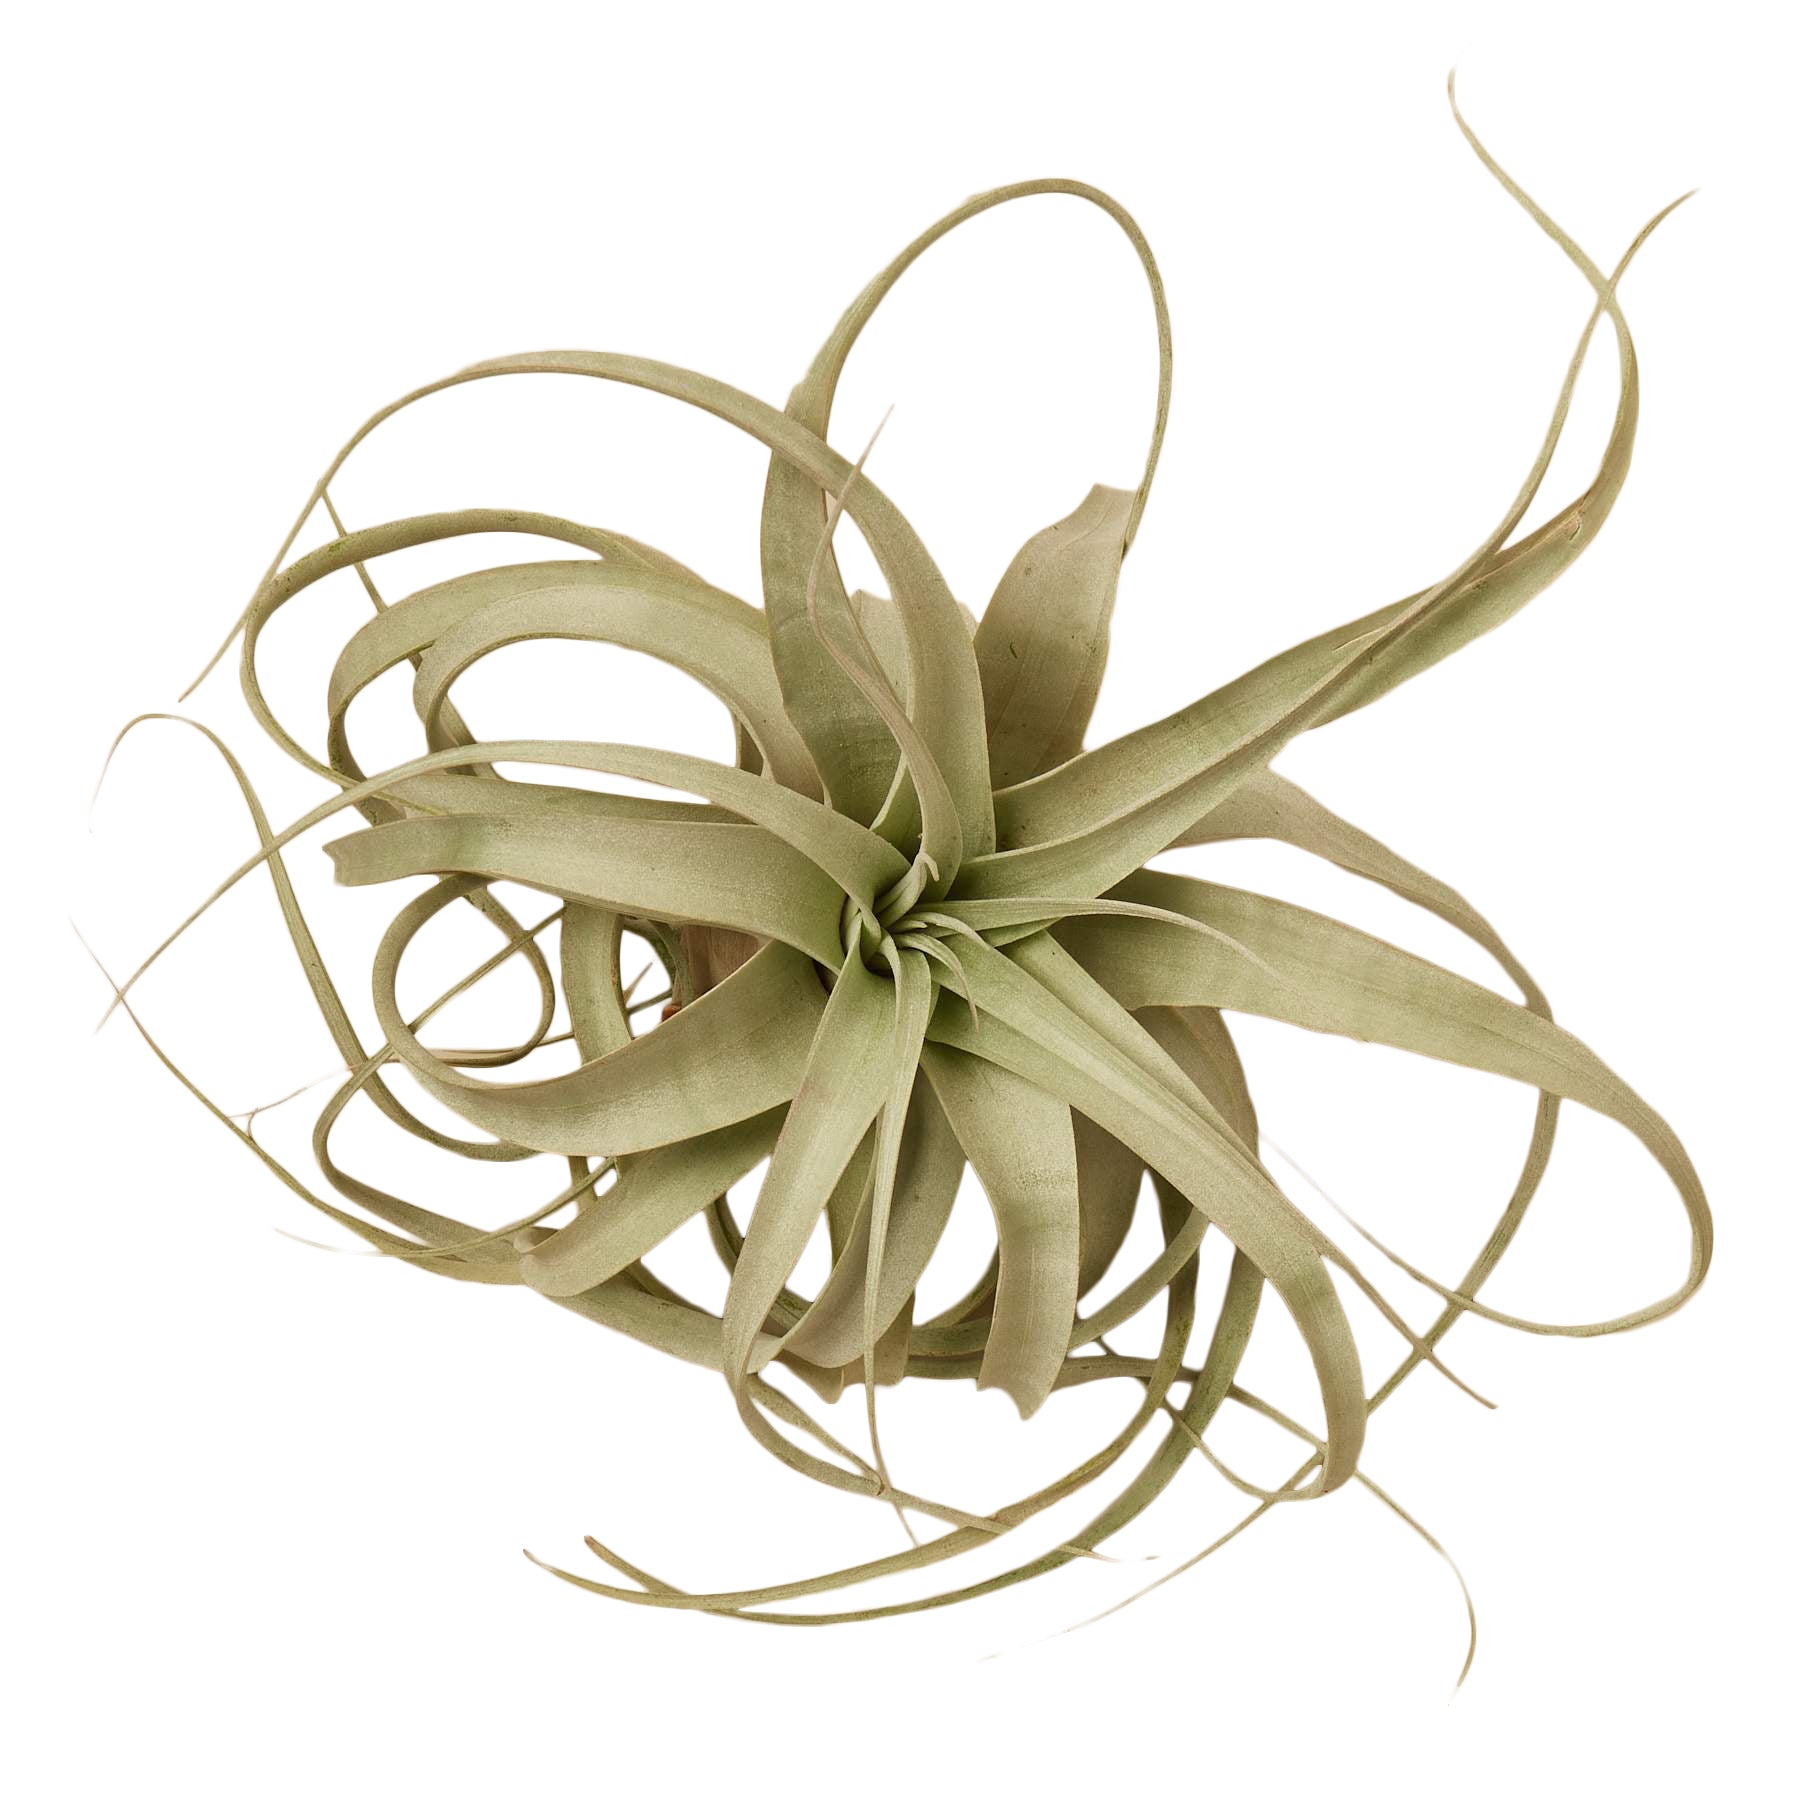 An air plant on a white background, ideal for those searching for the best plant nursery near them.